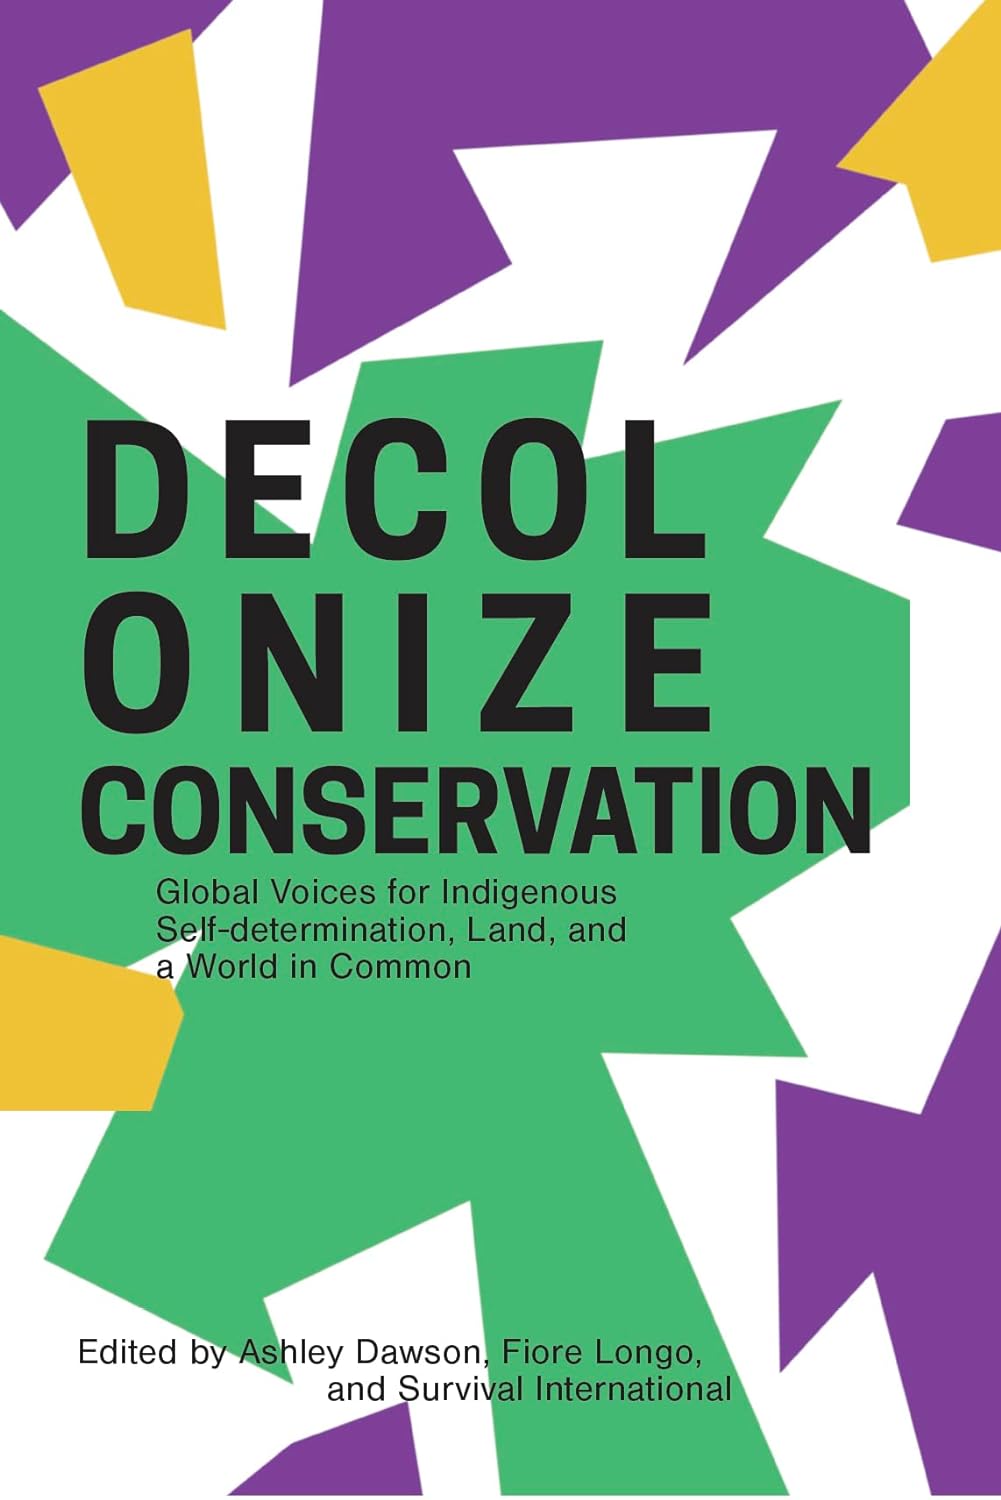 Decolonize Conservation: Global Voices for Indigenous Self-determination, Land, and a World in Common edited by Ashley Dawson, Fiore Longo, and Survival International